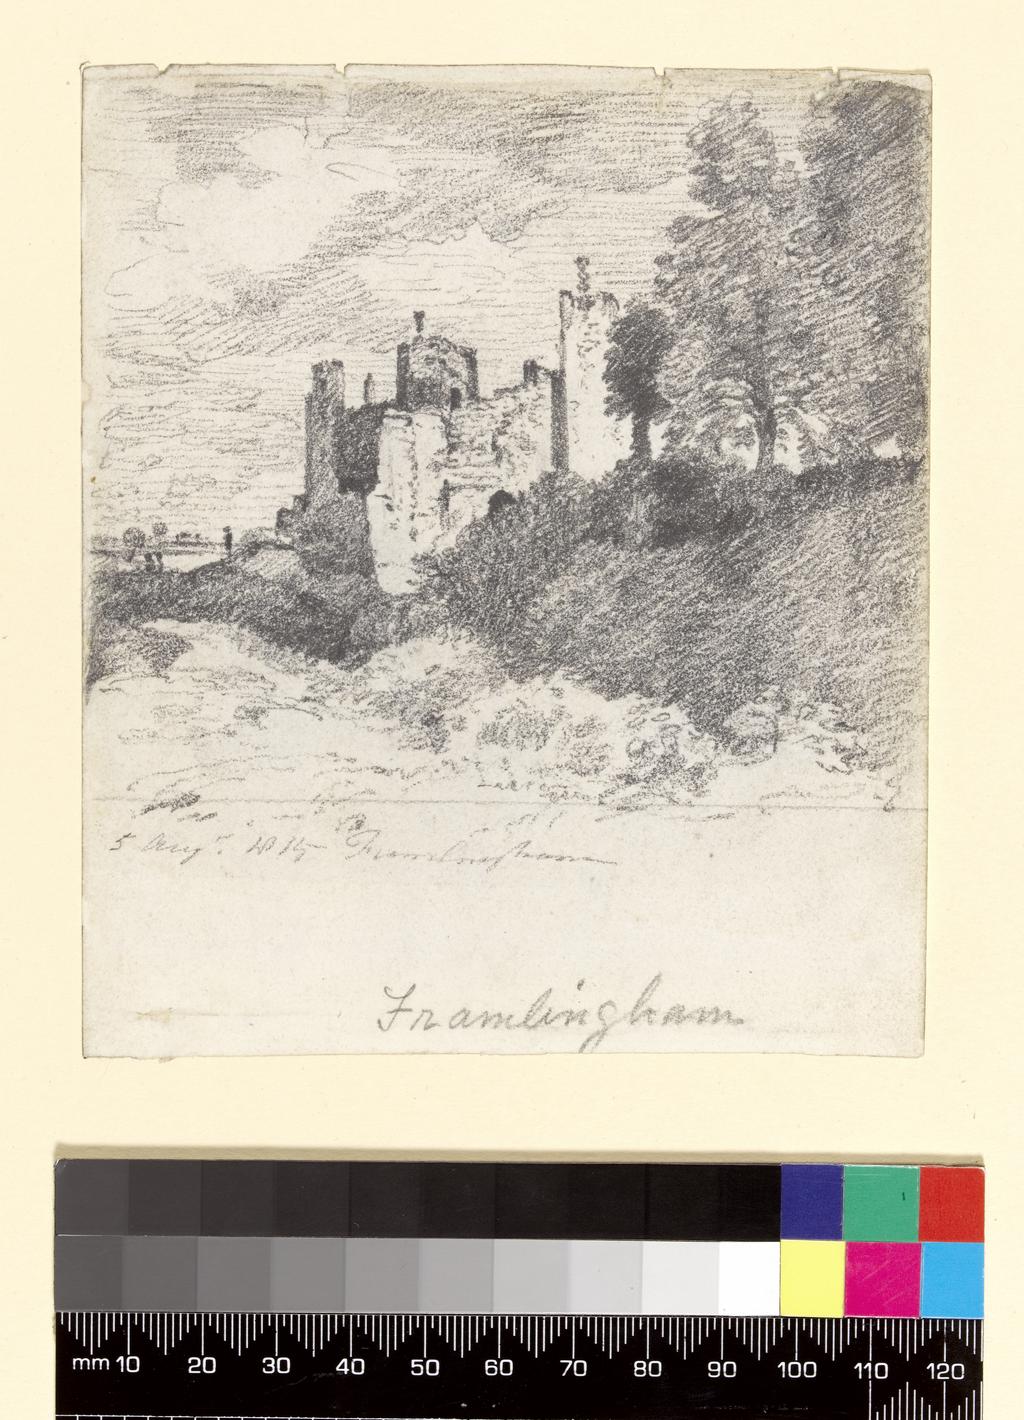 An image of Framlingham Castle from the South West (recto title). A very faint drawing of a woman resting her left hand on her right arm, probably reading a book (verso title). Constable, John (British, 1776-1837). Graphite on paper, height 134 mm, width 114 mm, 1815.